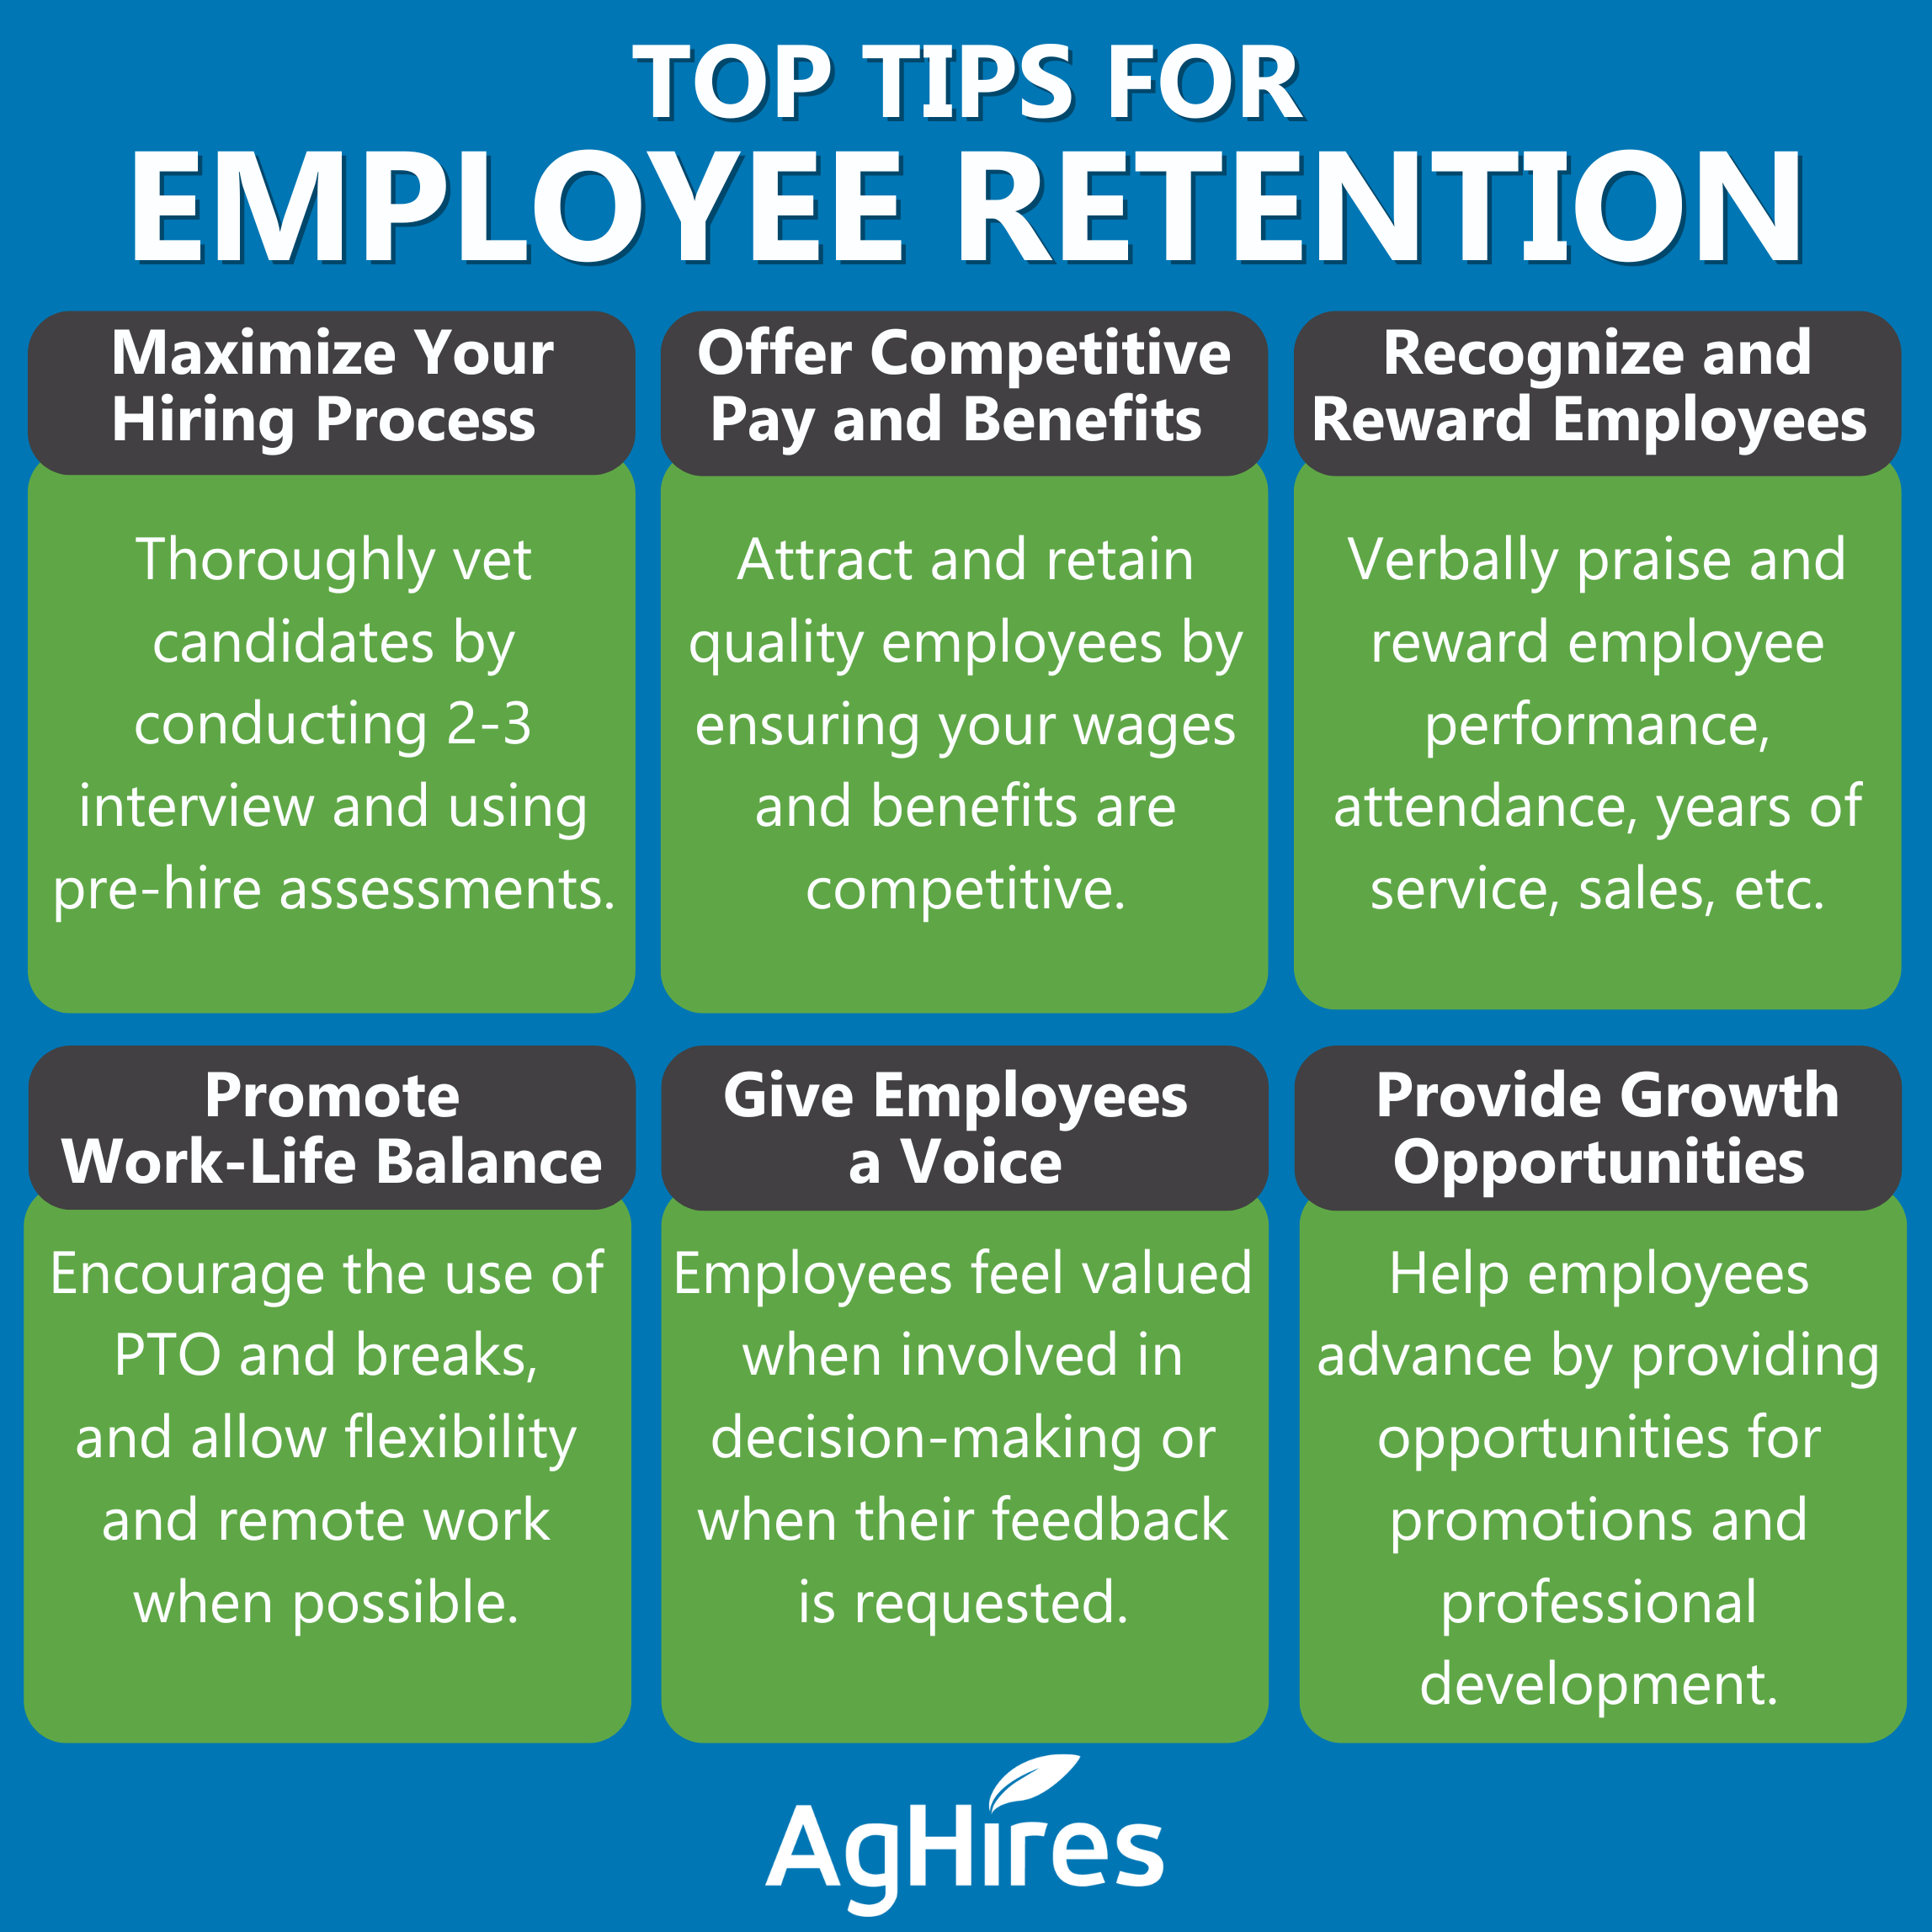 Our top tips for Employee retention